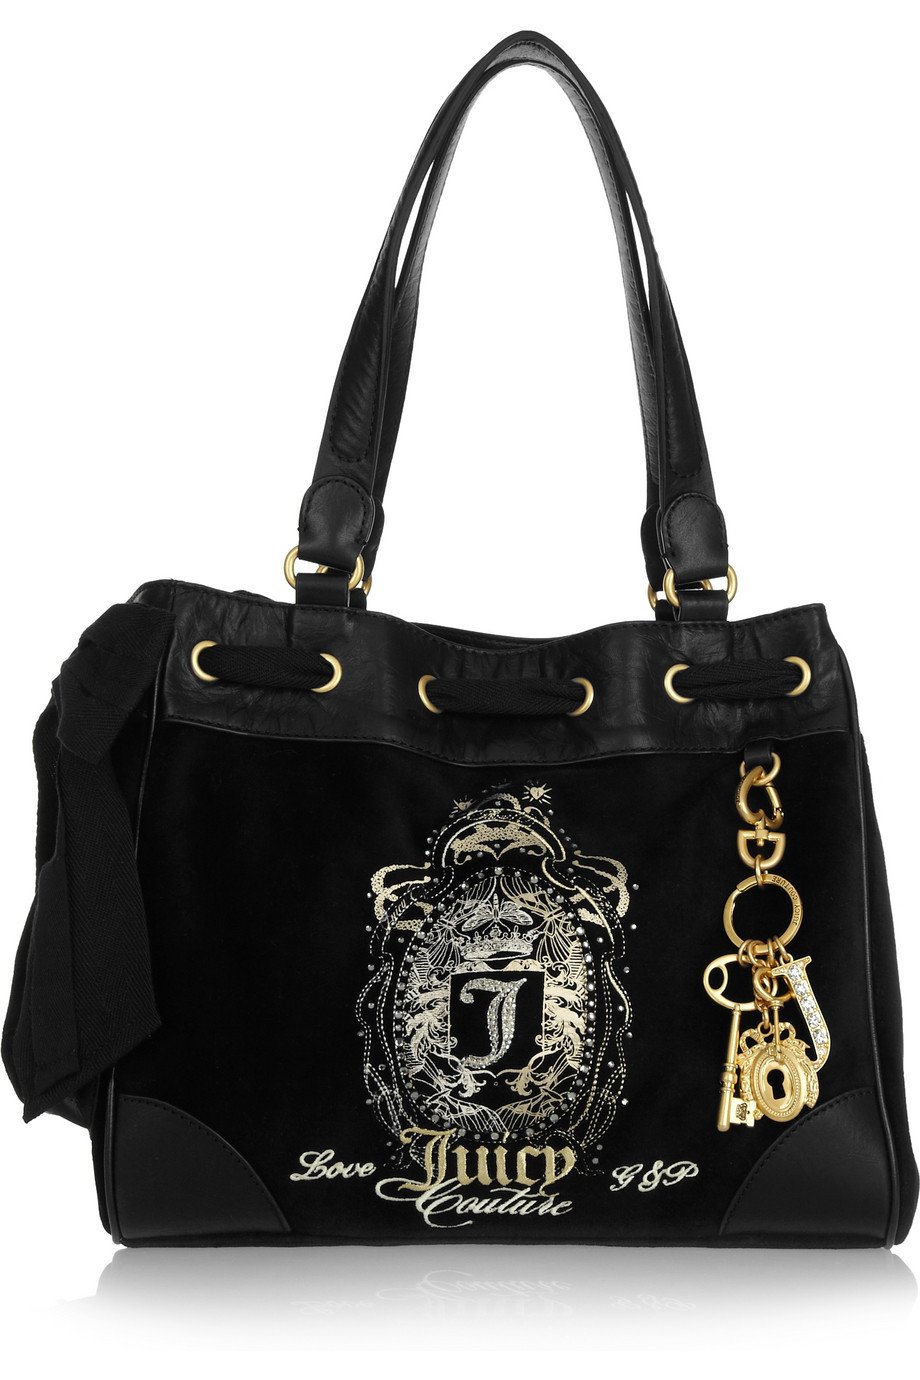 Juicy Couture Daydreamer Velour and Leather Bag in Black | Lyst